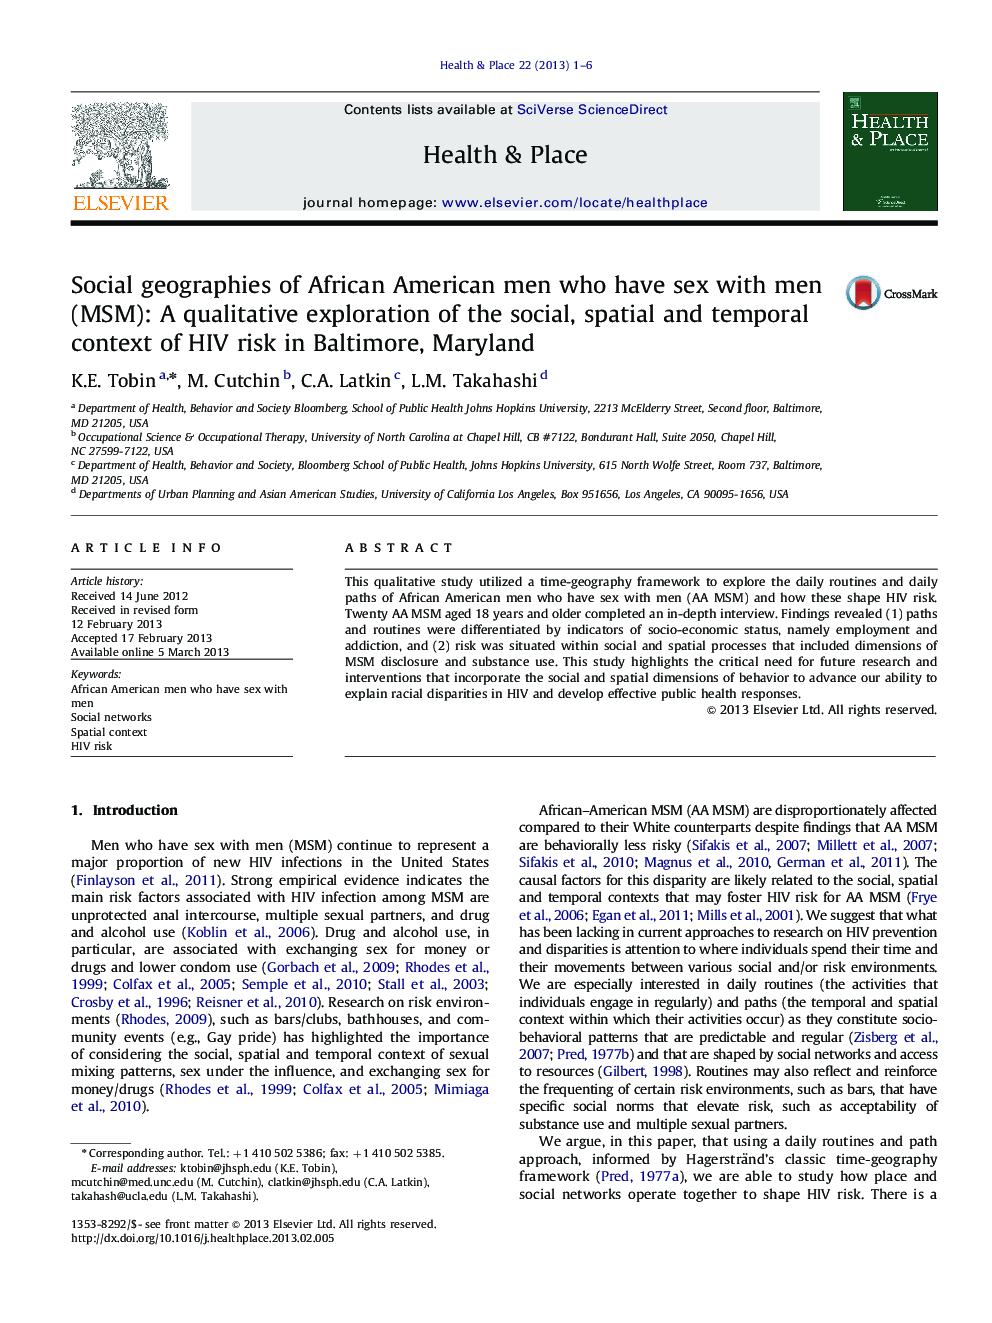 Social geographies of African American men who have sex with men (MSM): A qualitative exploration of the social, spatial and temporal context of HIV risk in Baltimore, Maryland